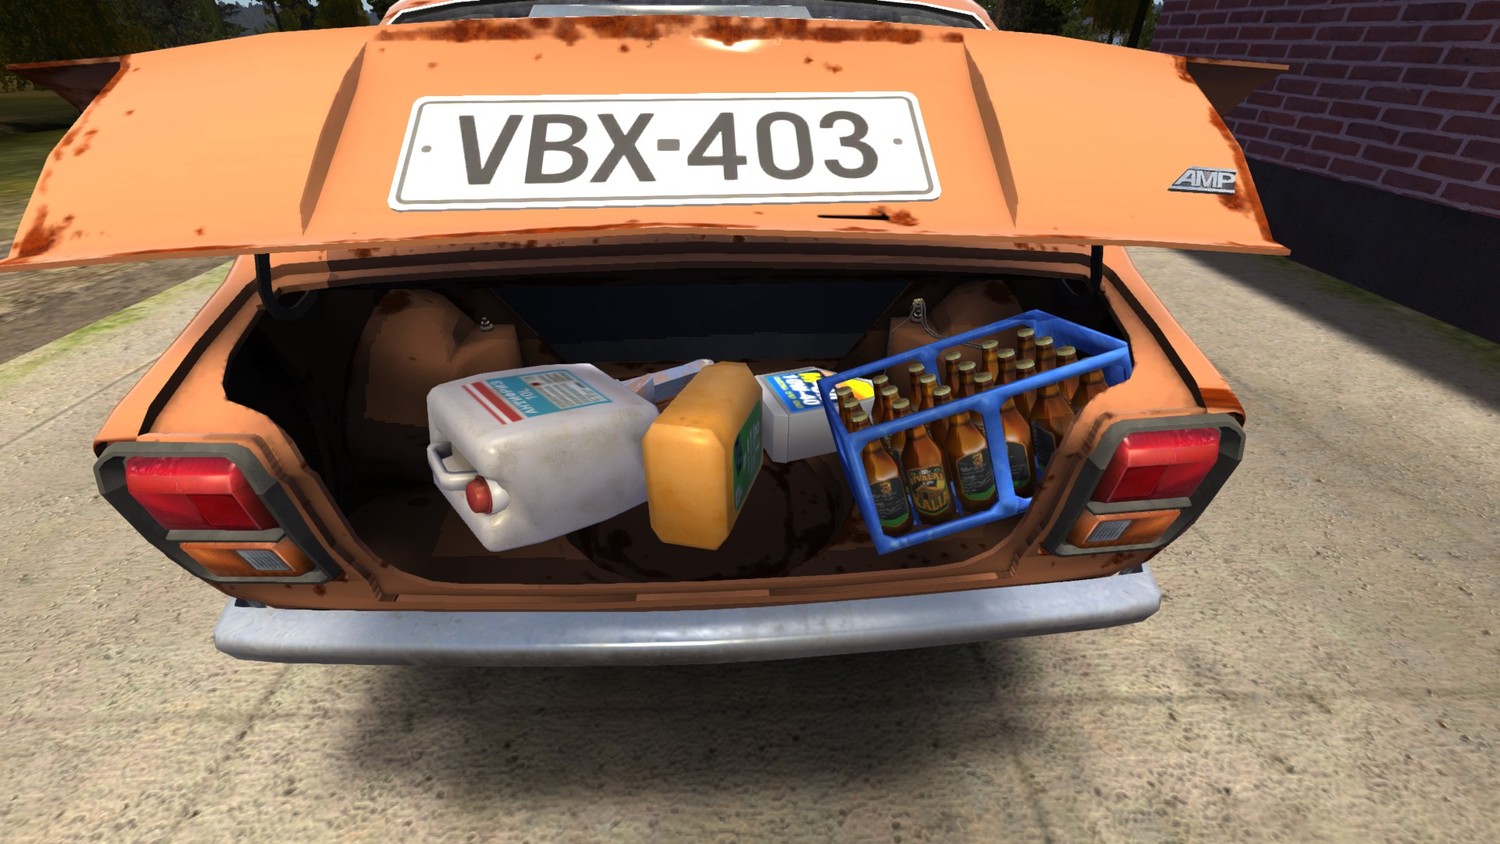 My Summer Car: SaveGame (Stock Satsuma, license plates received, essentials in trunk)